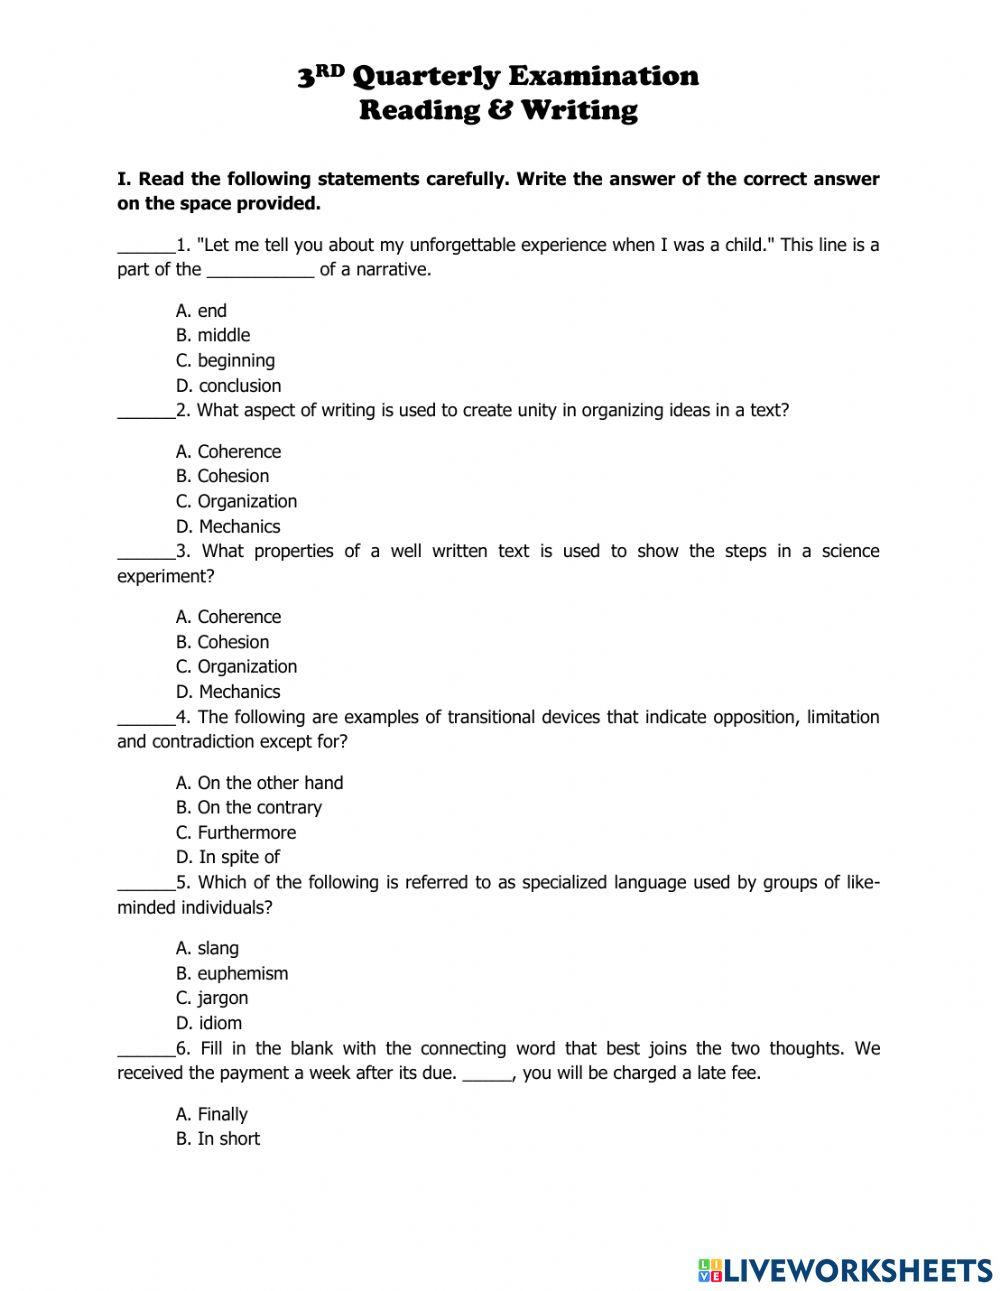 Reading And Writing - 3rd Quarter Assessment online exercise for | Live  Worksheets